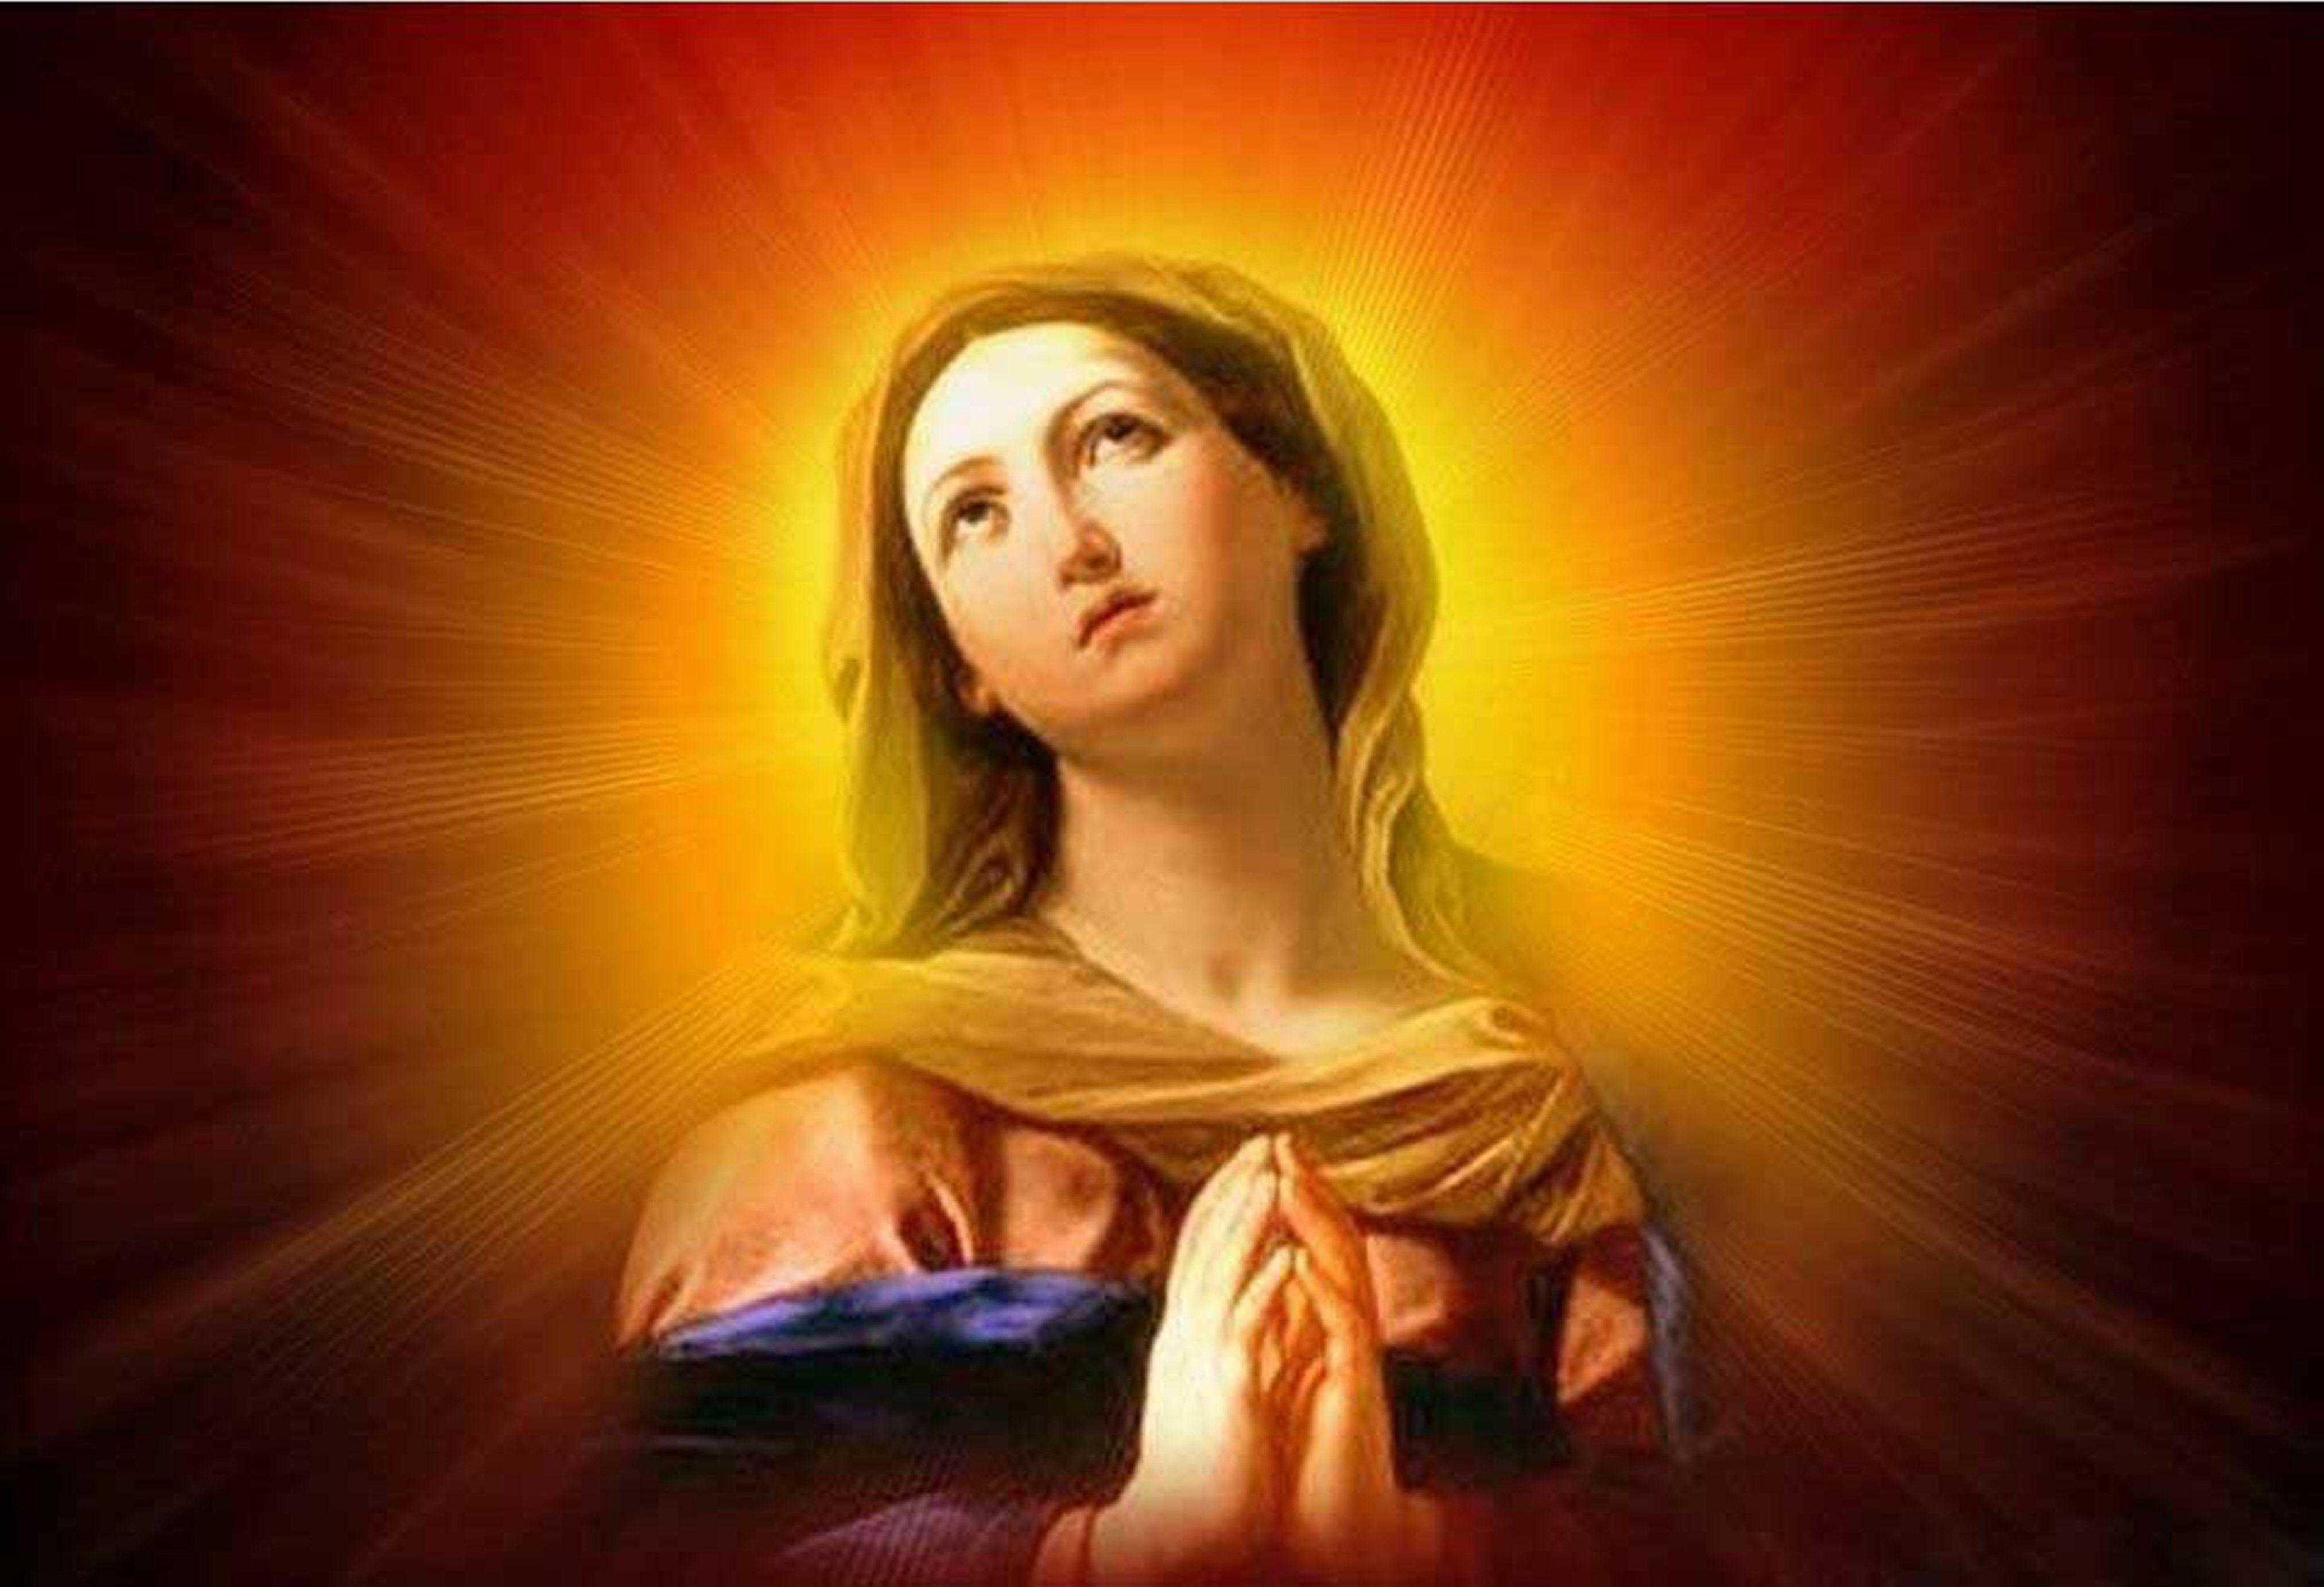 🔥 Download Mother Mary Wallpaper By Kjohnson39 Virgin Mary Wallpapers Virgin Mary Wallpapers